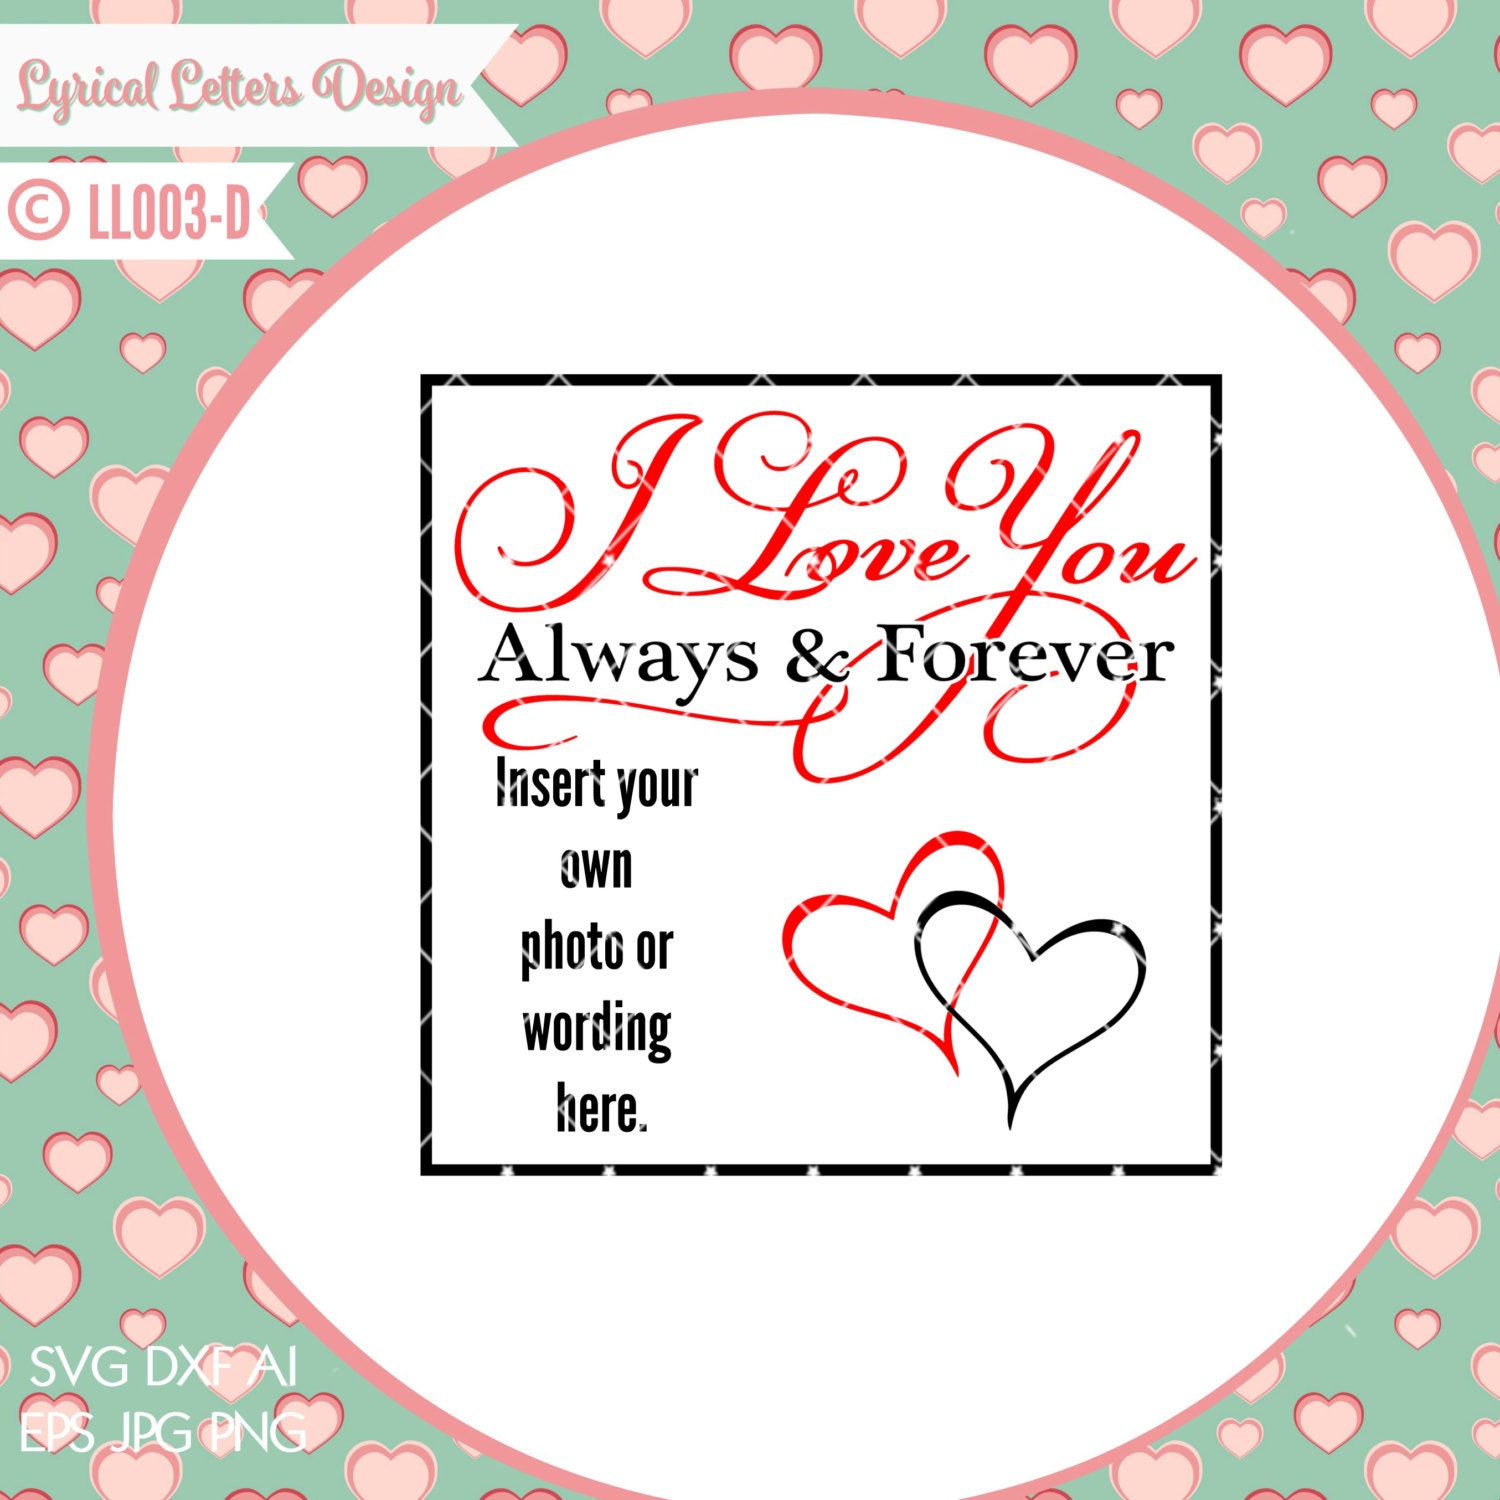 I love you Always and Forever LL003 D svg Vector Cutting